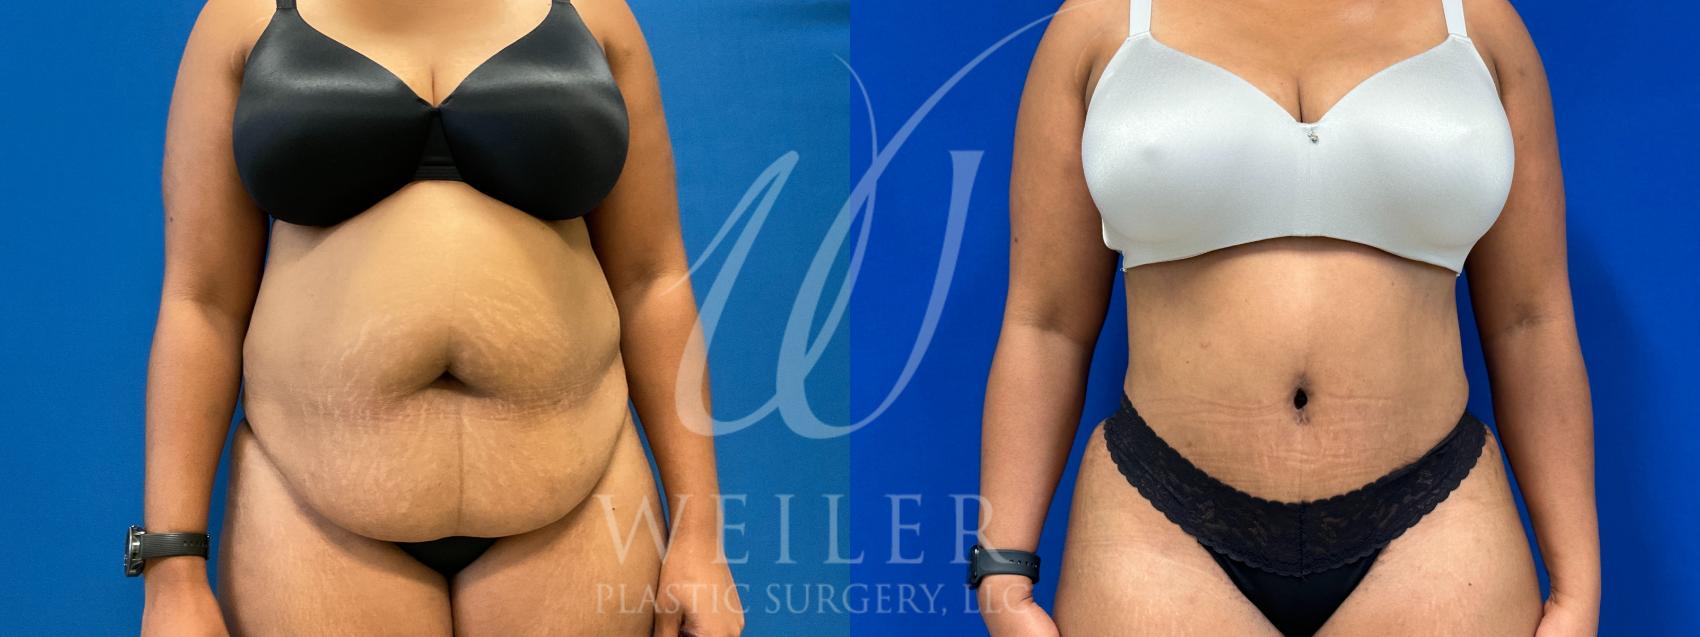 Weiler Plastic Surgery - Abdominoplasty or Tummy Tuck is one of